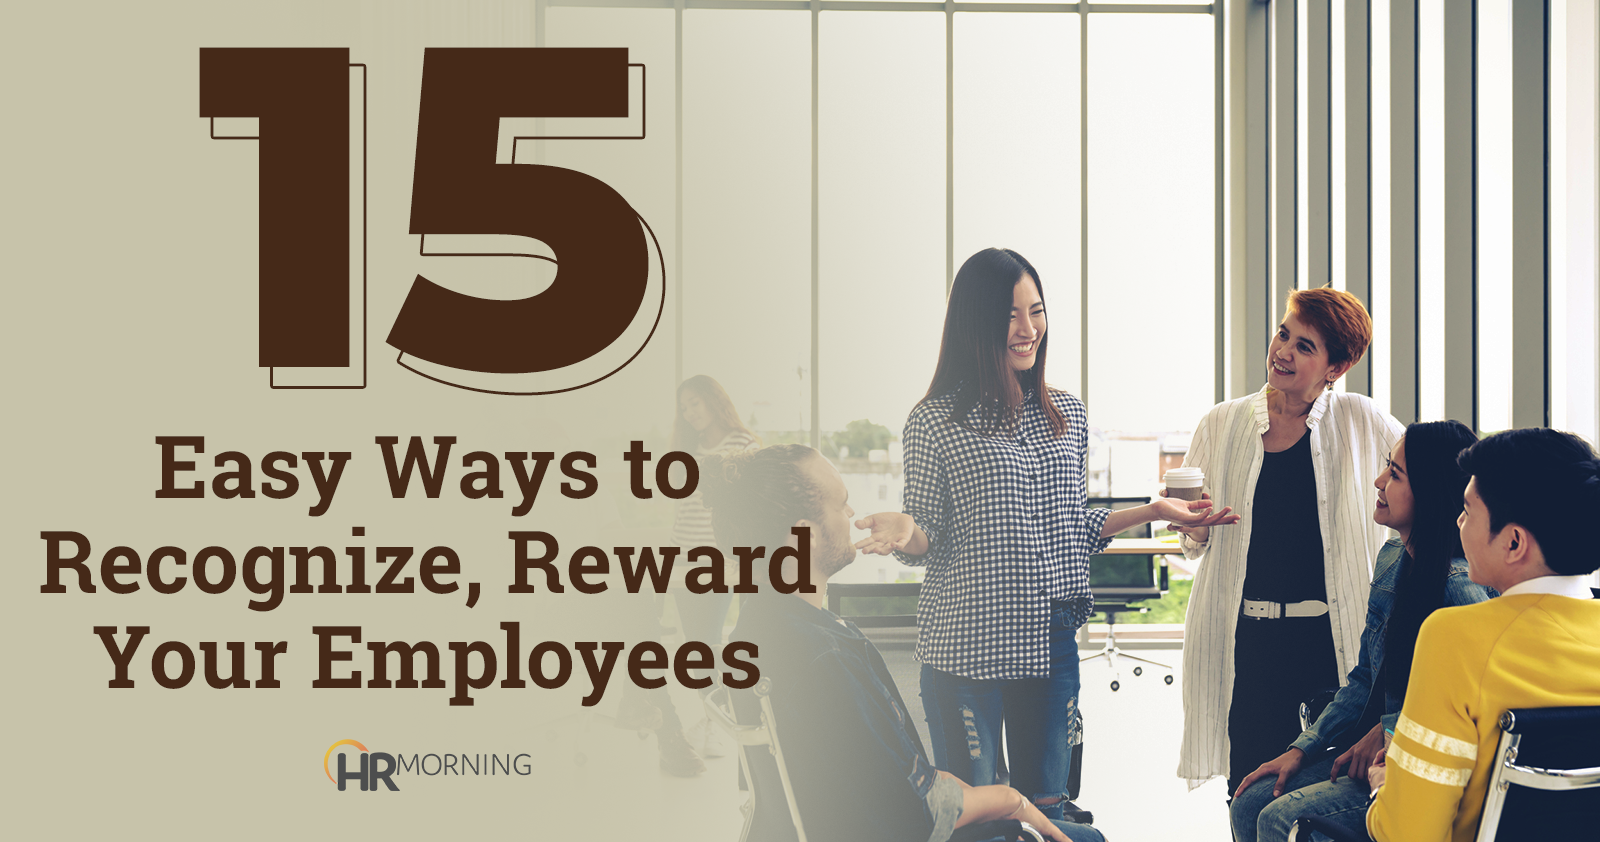 15 easy ways to recognize, reward your employees